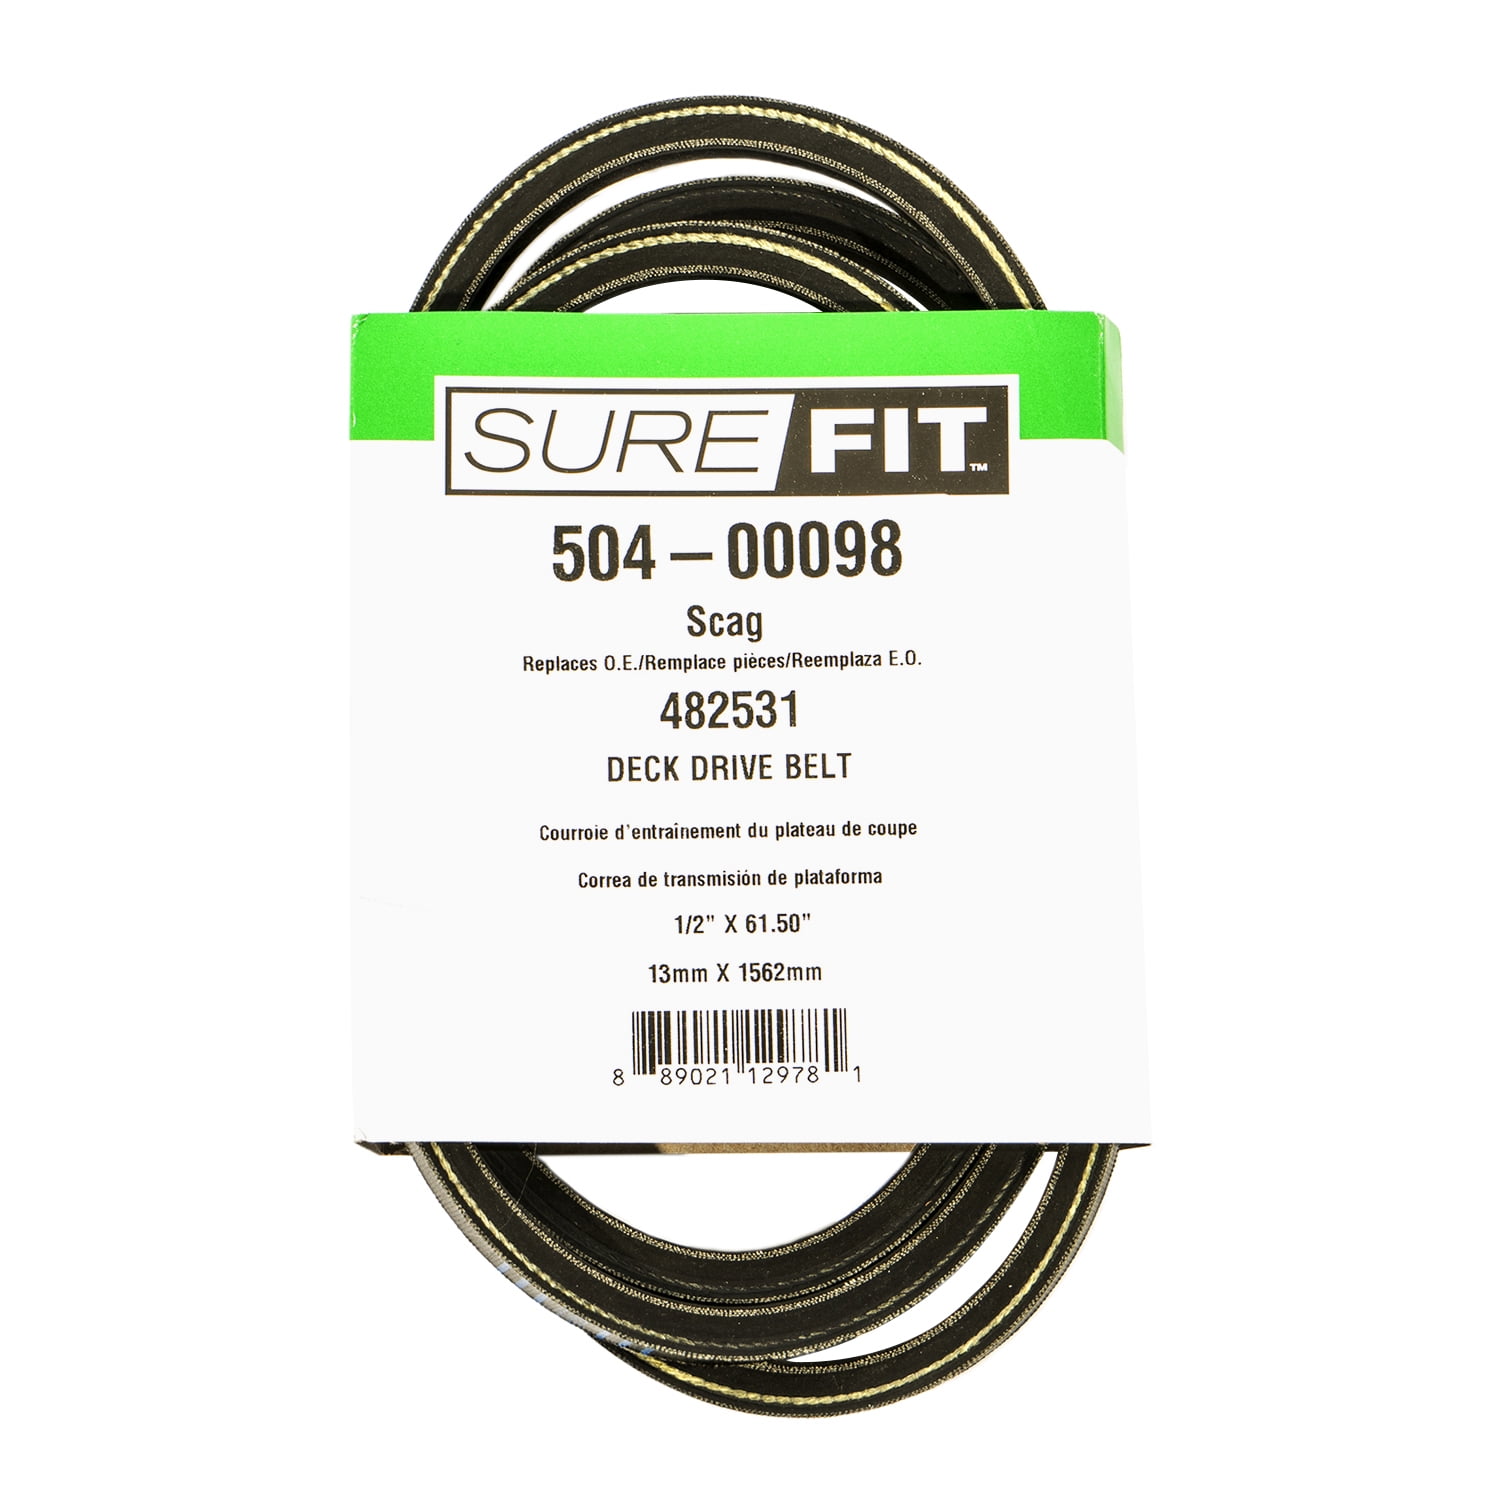 SCAG POWER EQUIPMENT 482716 made with Kevlar Replacement Belt 